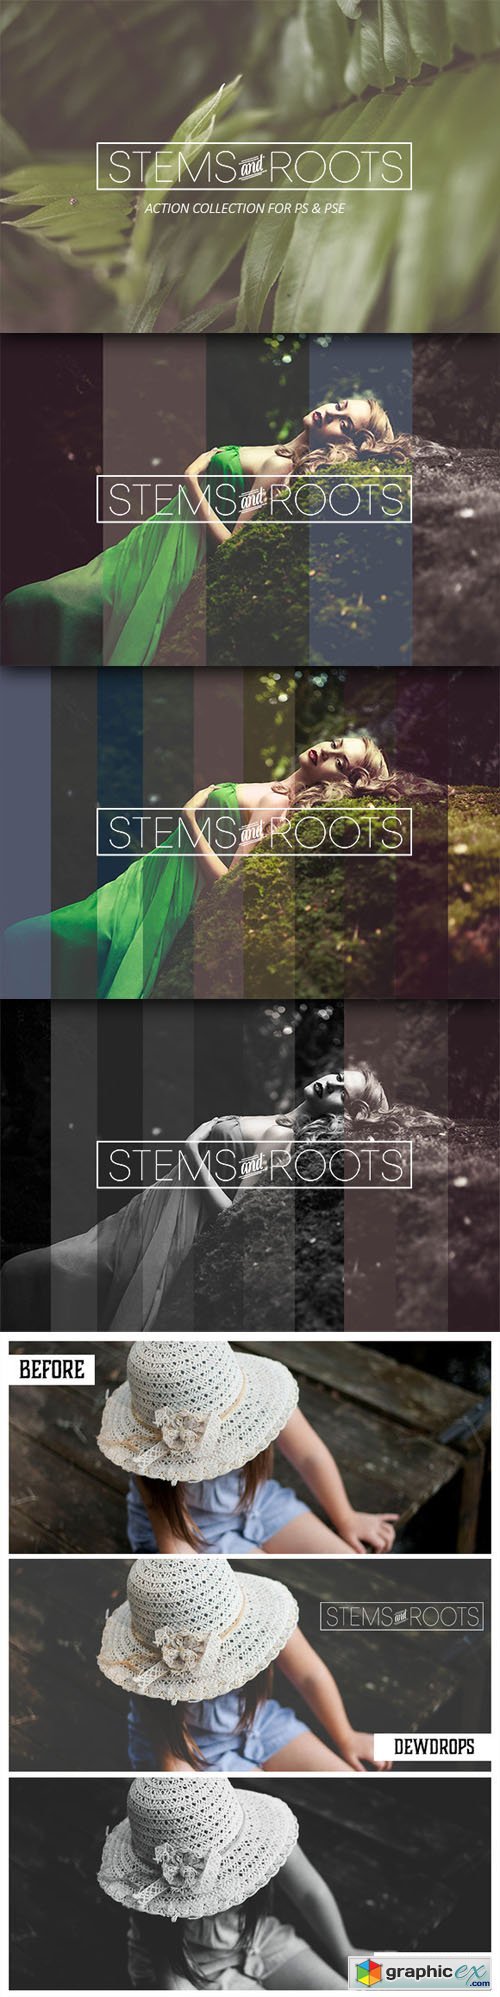 Stems & Roots Action Collection